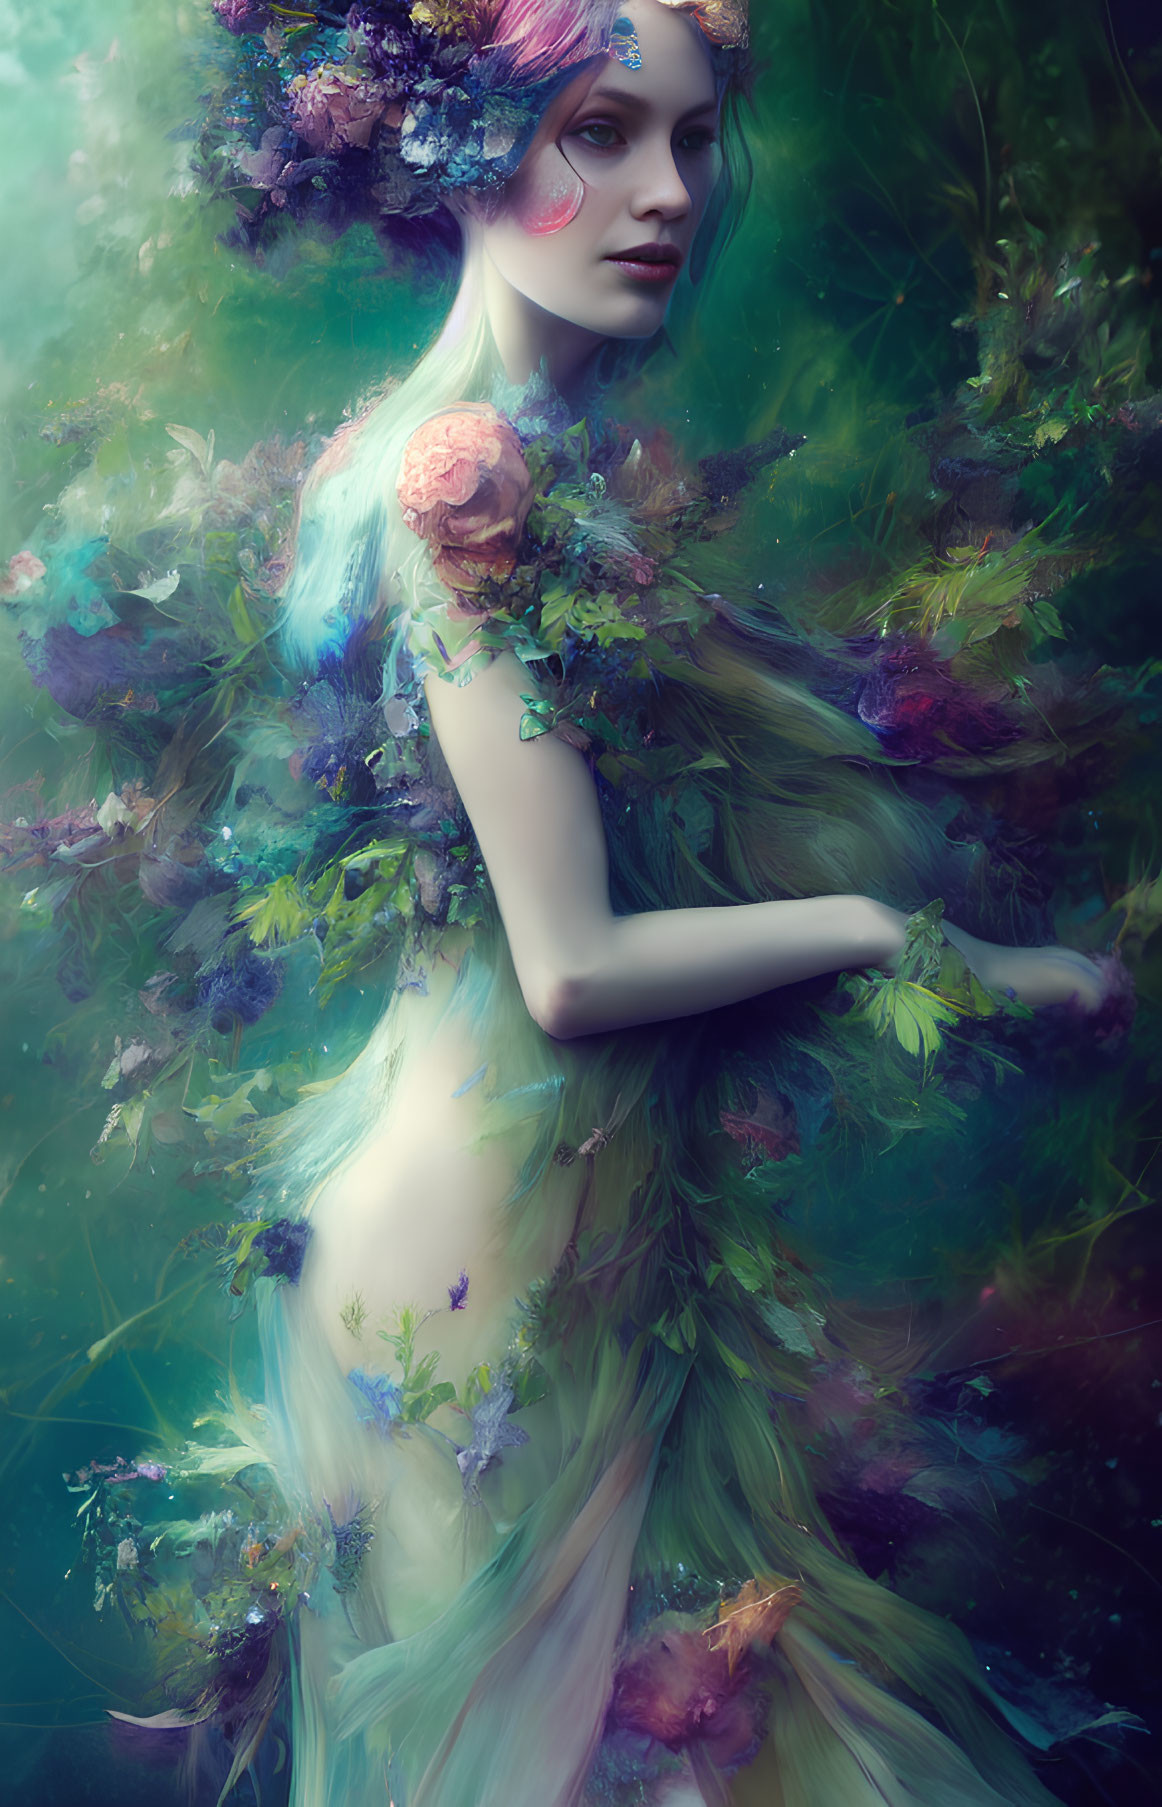 Woman merged with floral elements in vibrant blues and greens